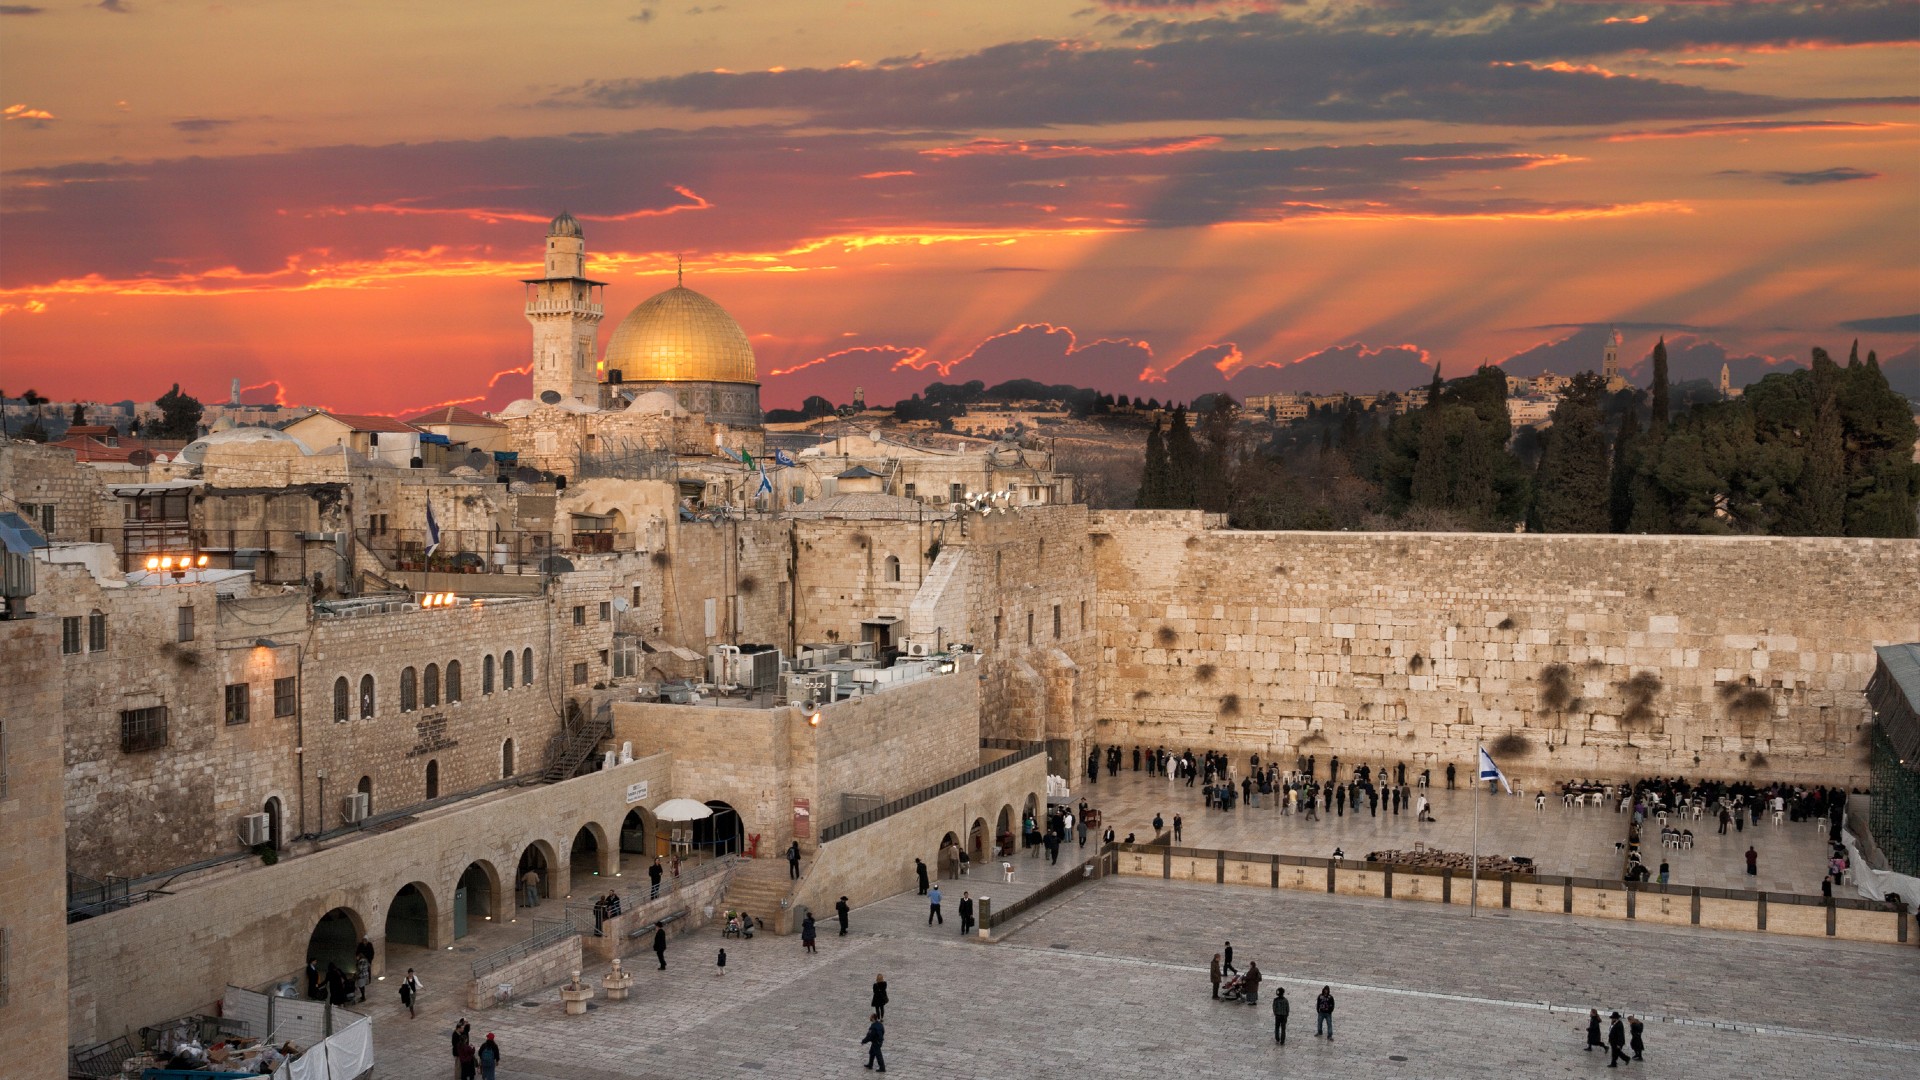 Western Wall at the Dome of the Rock on the Temple Mount in Jerusalem, Israel.